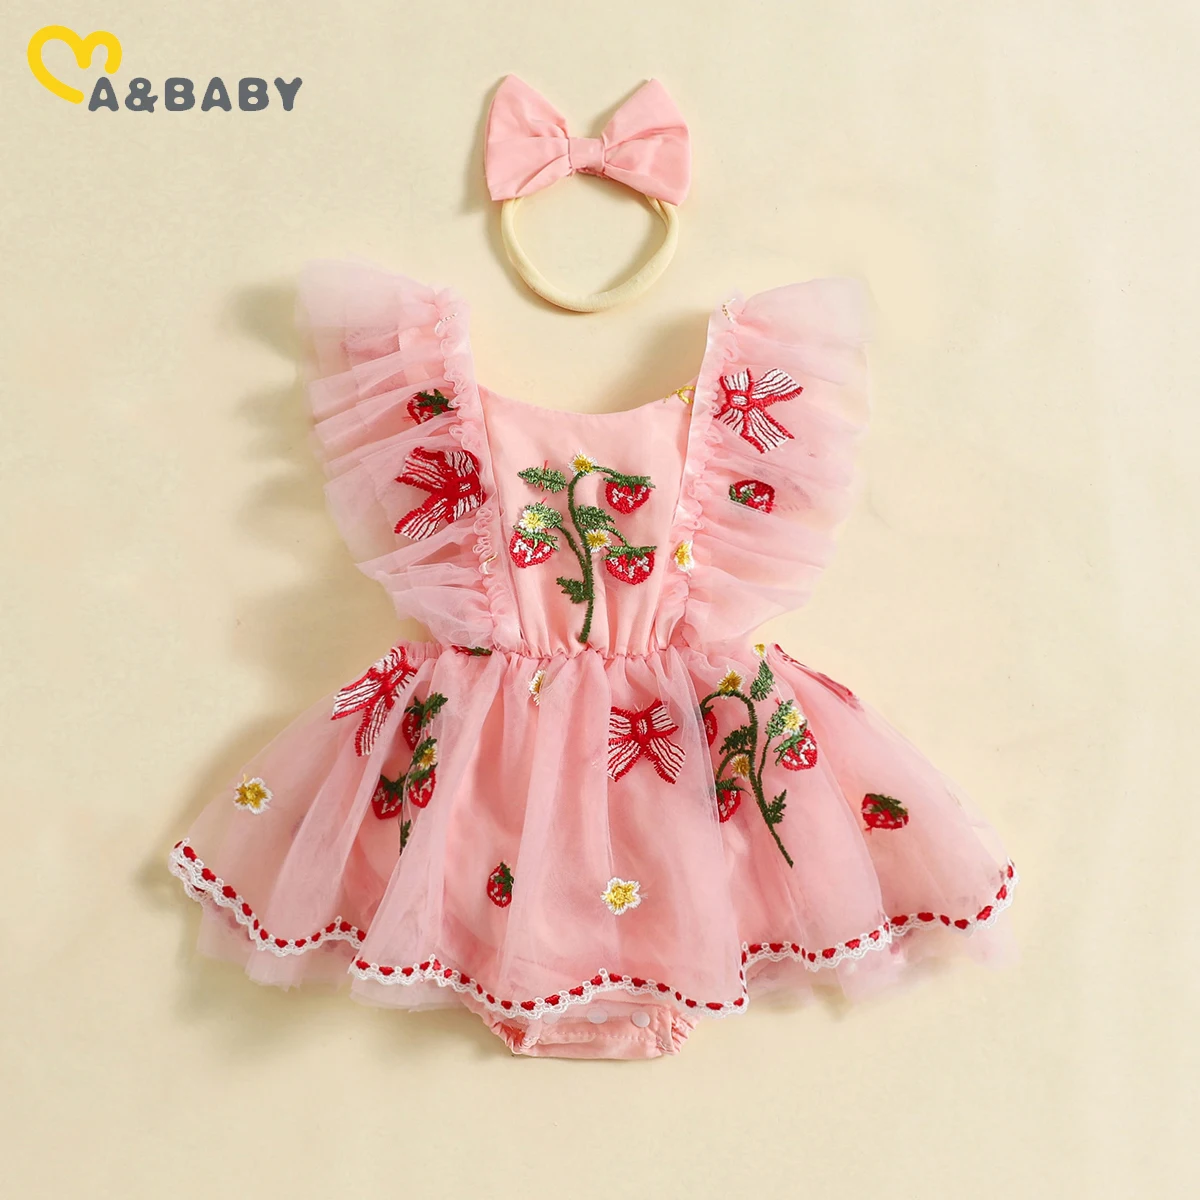 

ma&baby 0-18M Baby Girls Romper Newborn Infant Toddler Jumpsuit Floral Strawberry Embroidery Sunsuit Summer Outfits